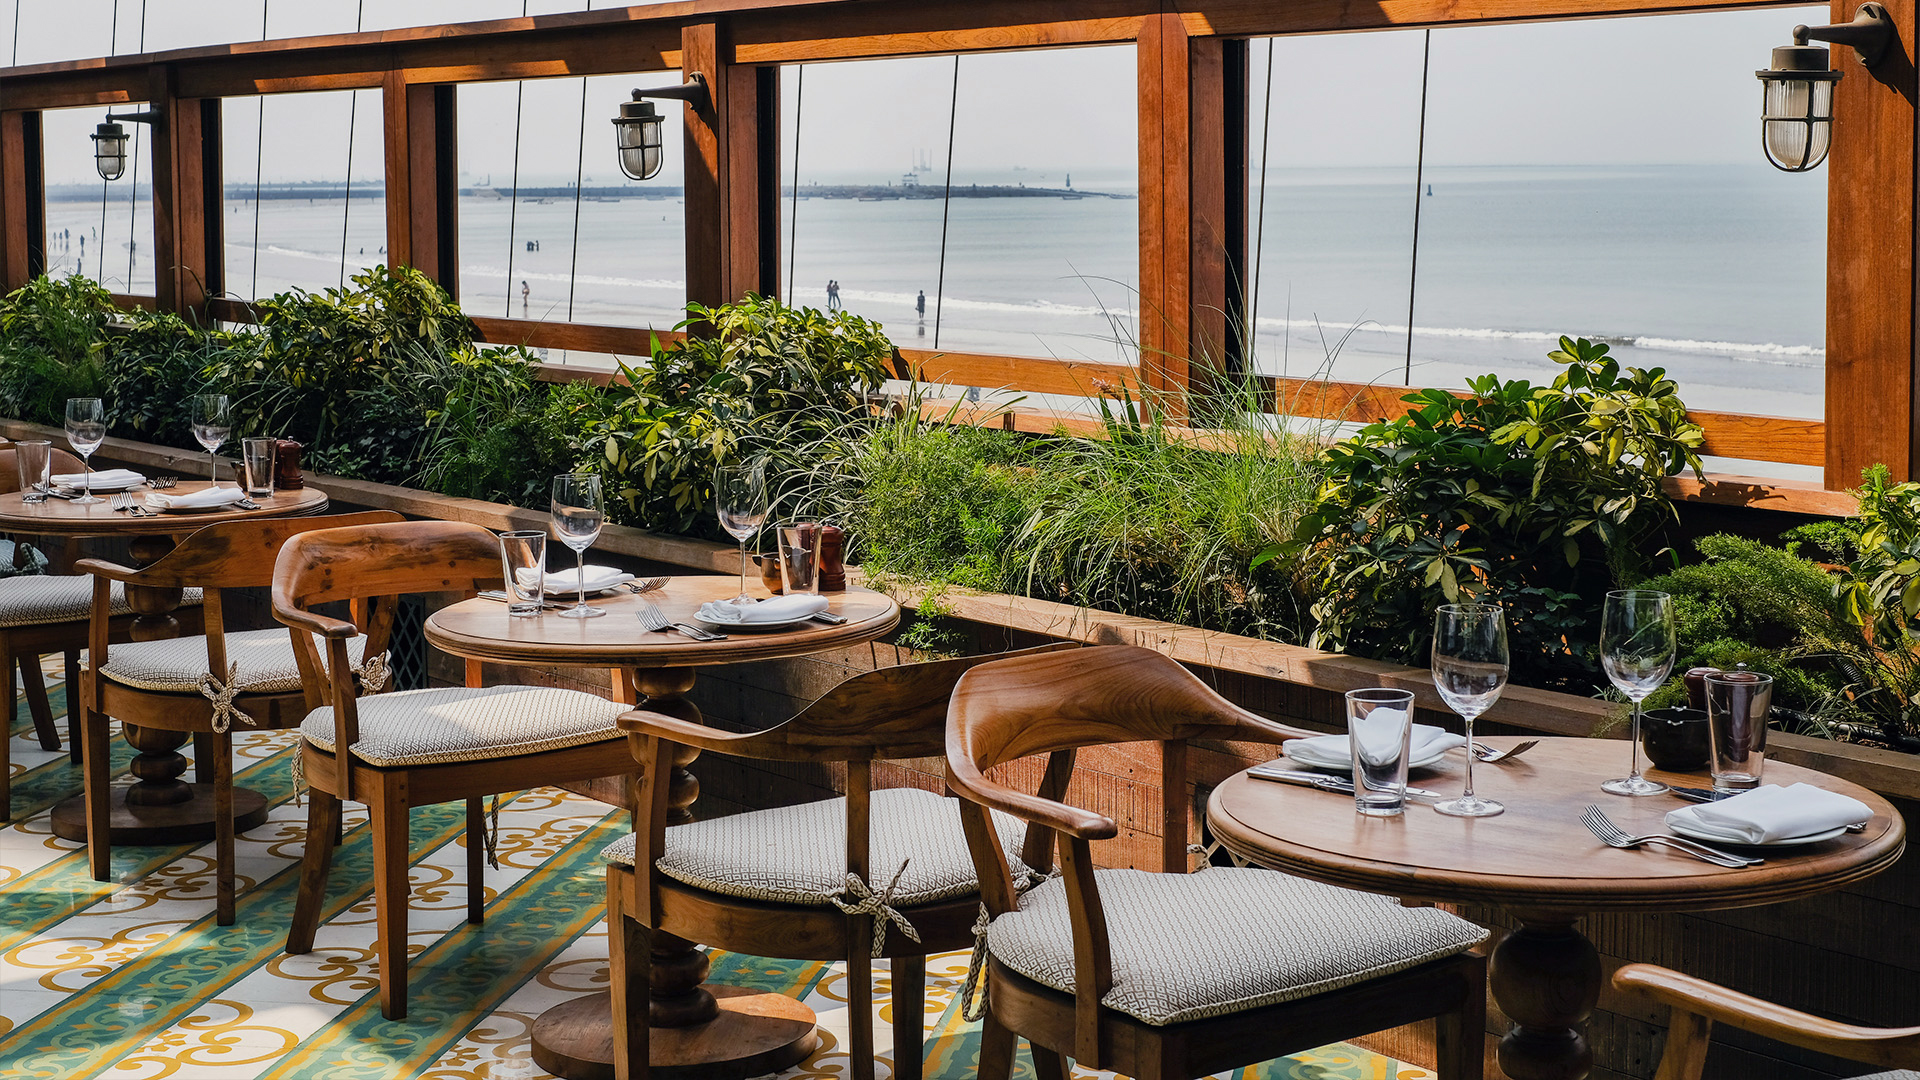 Mumbai City Guide | A row of tables in front of windows overlooking the windows in Mumbai, India